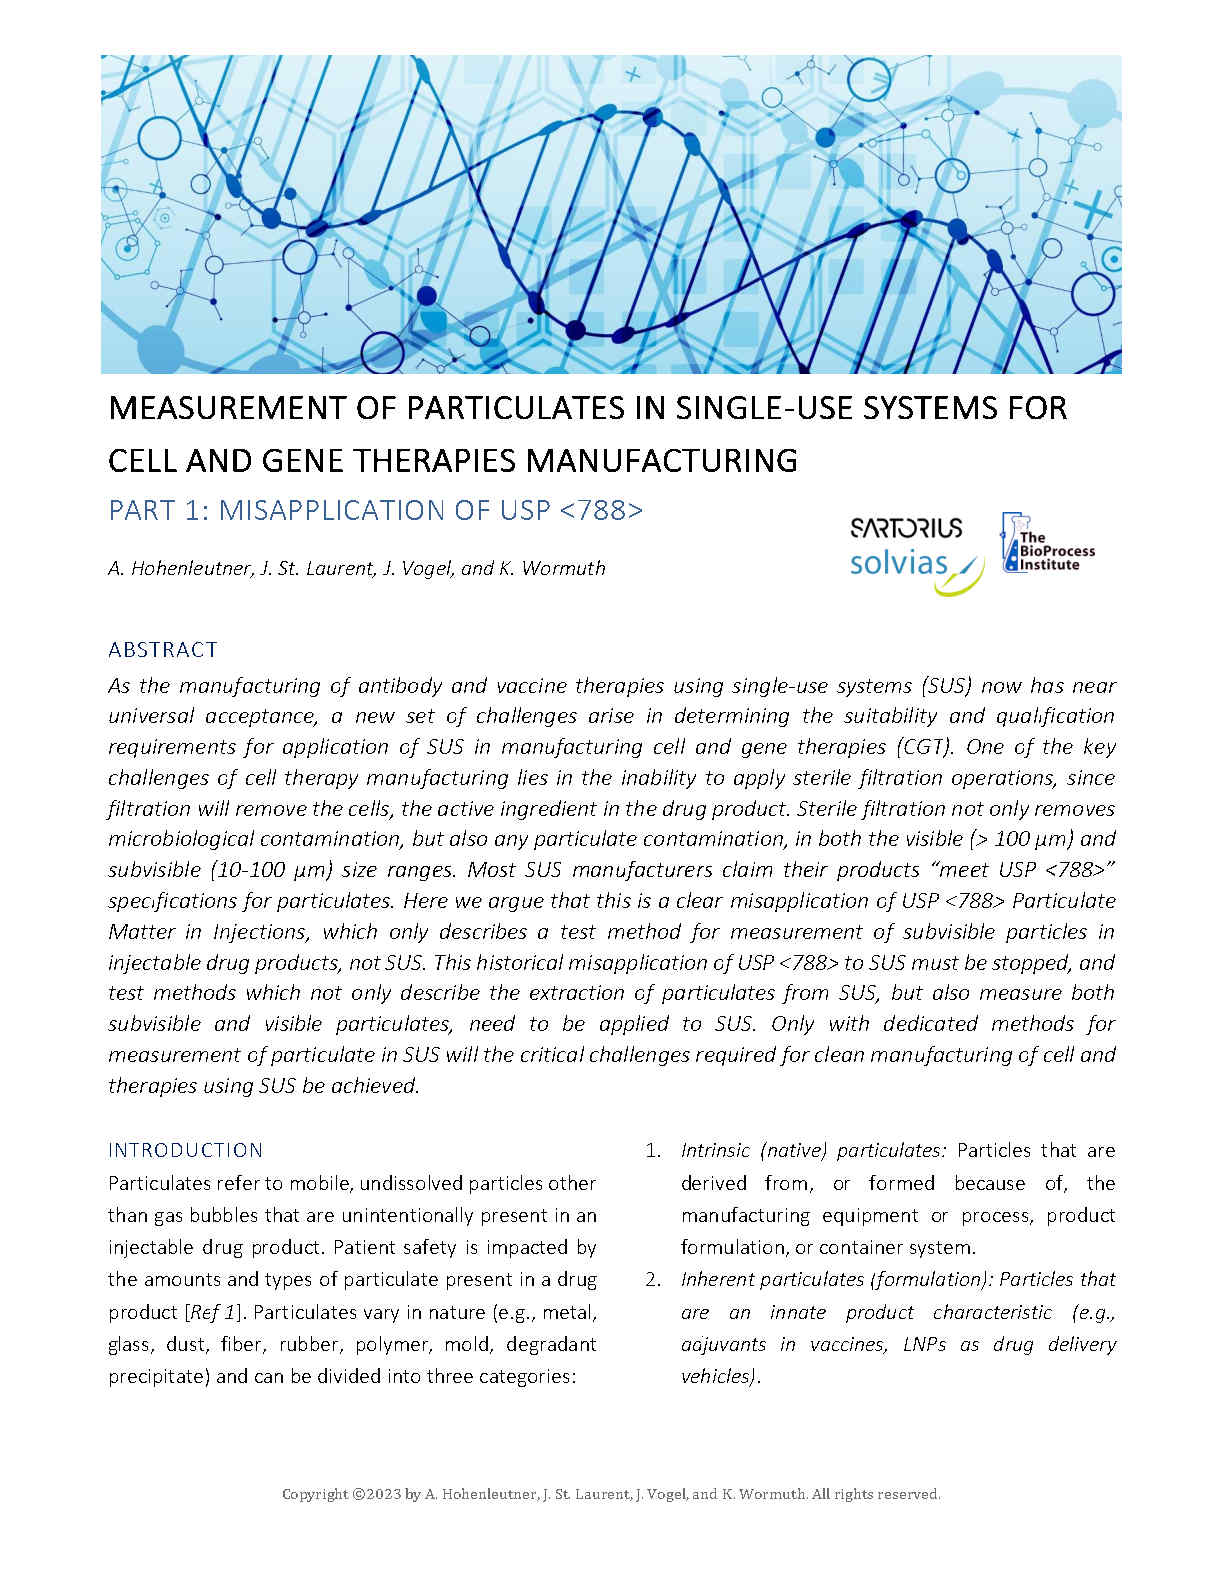 MEASUREMENT OF PARTICULATES IN SINGLE-USE SYSTEMS FOR CELL AND GENE THERAPIES MANUFACTURING